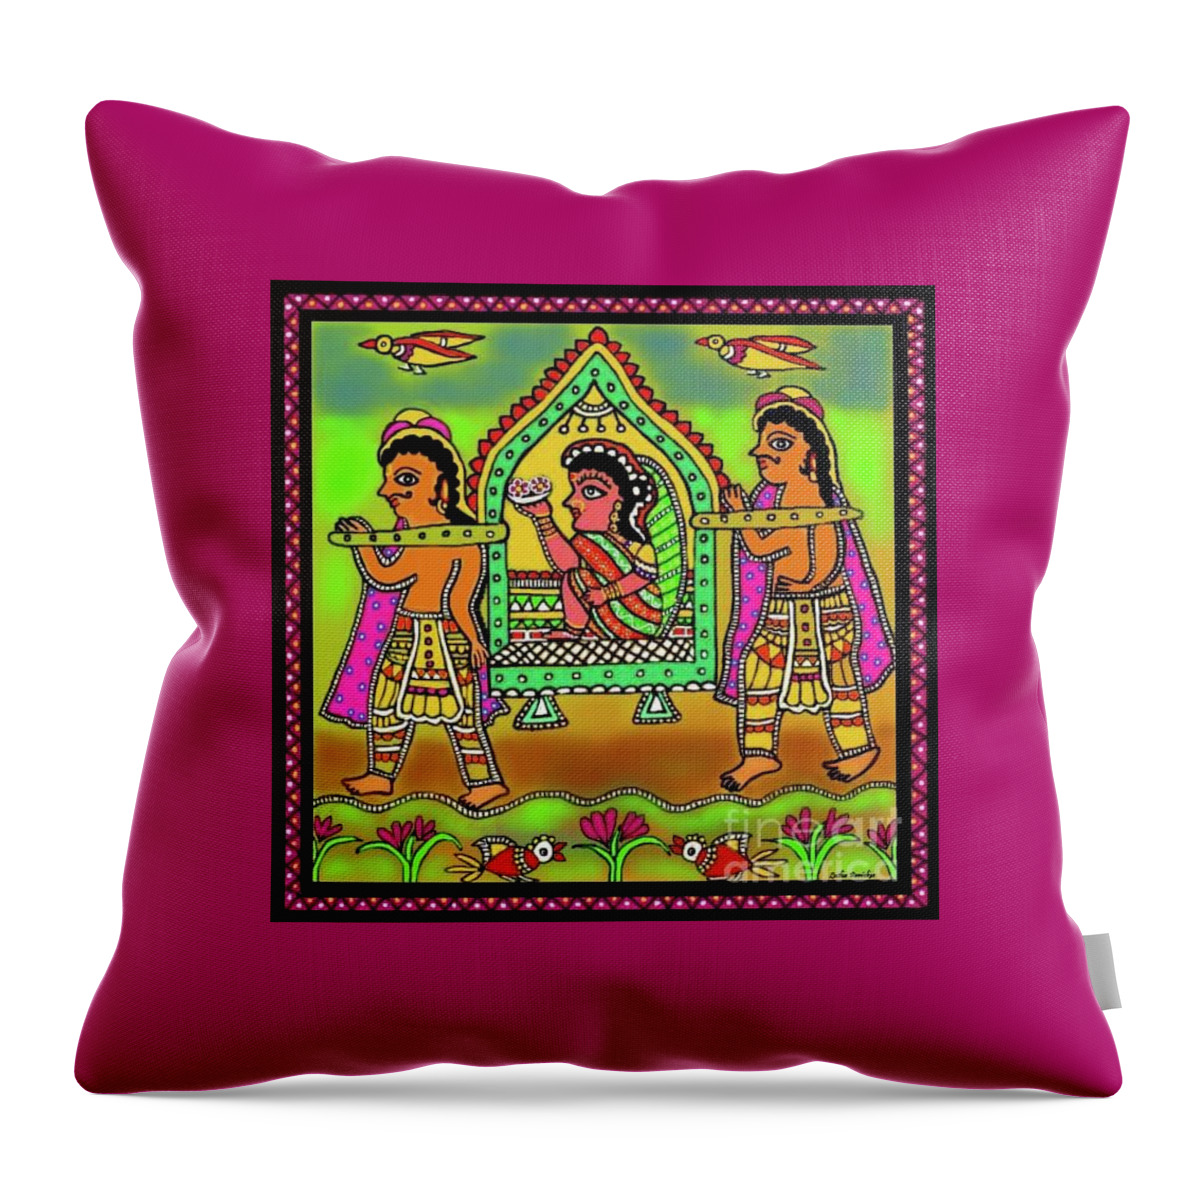 Madhubani Painting Throw Pillow featuring the digital art Bride in a Palanquin by Latha Gokuldas Panicker